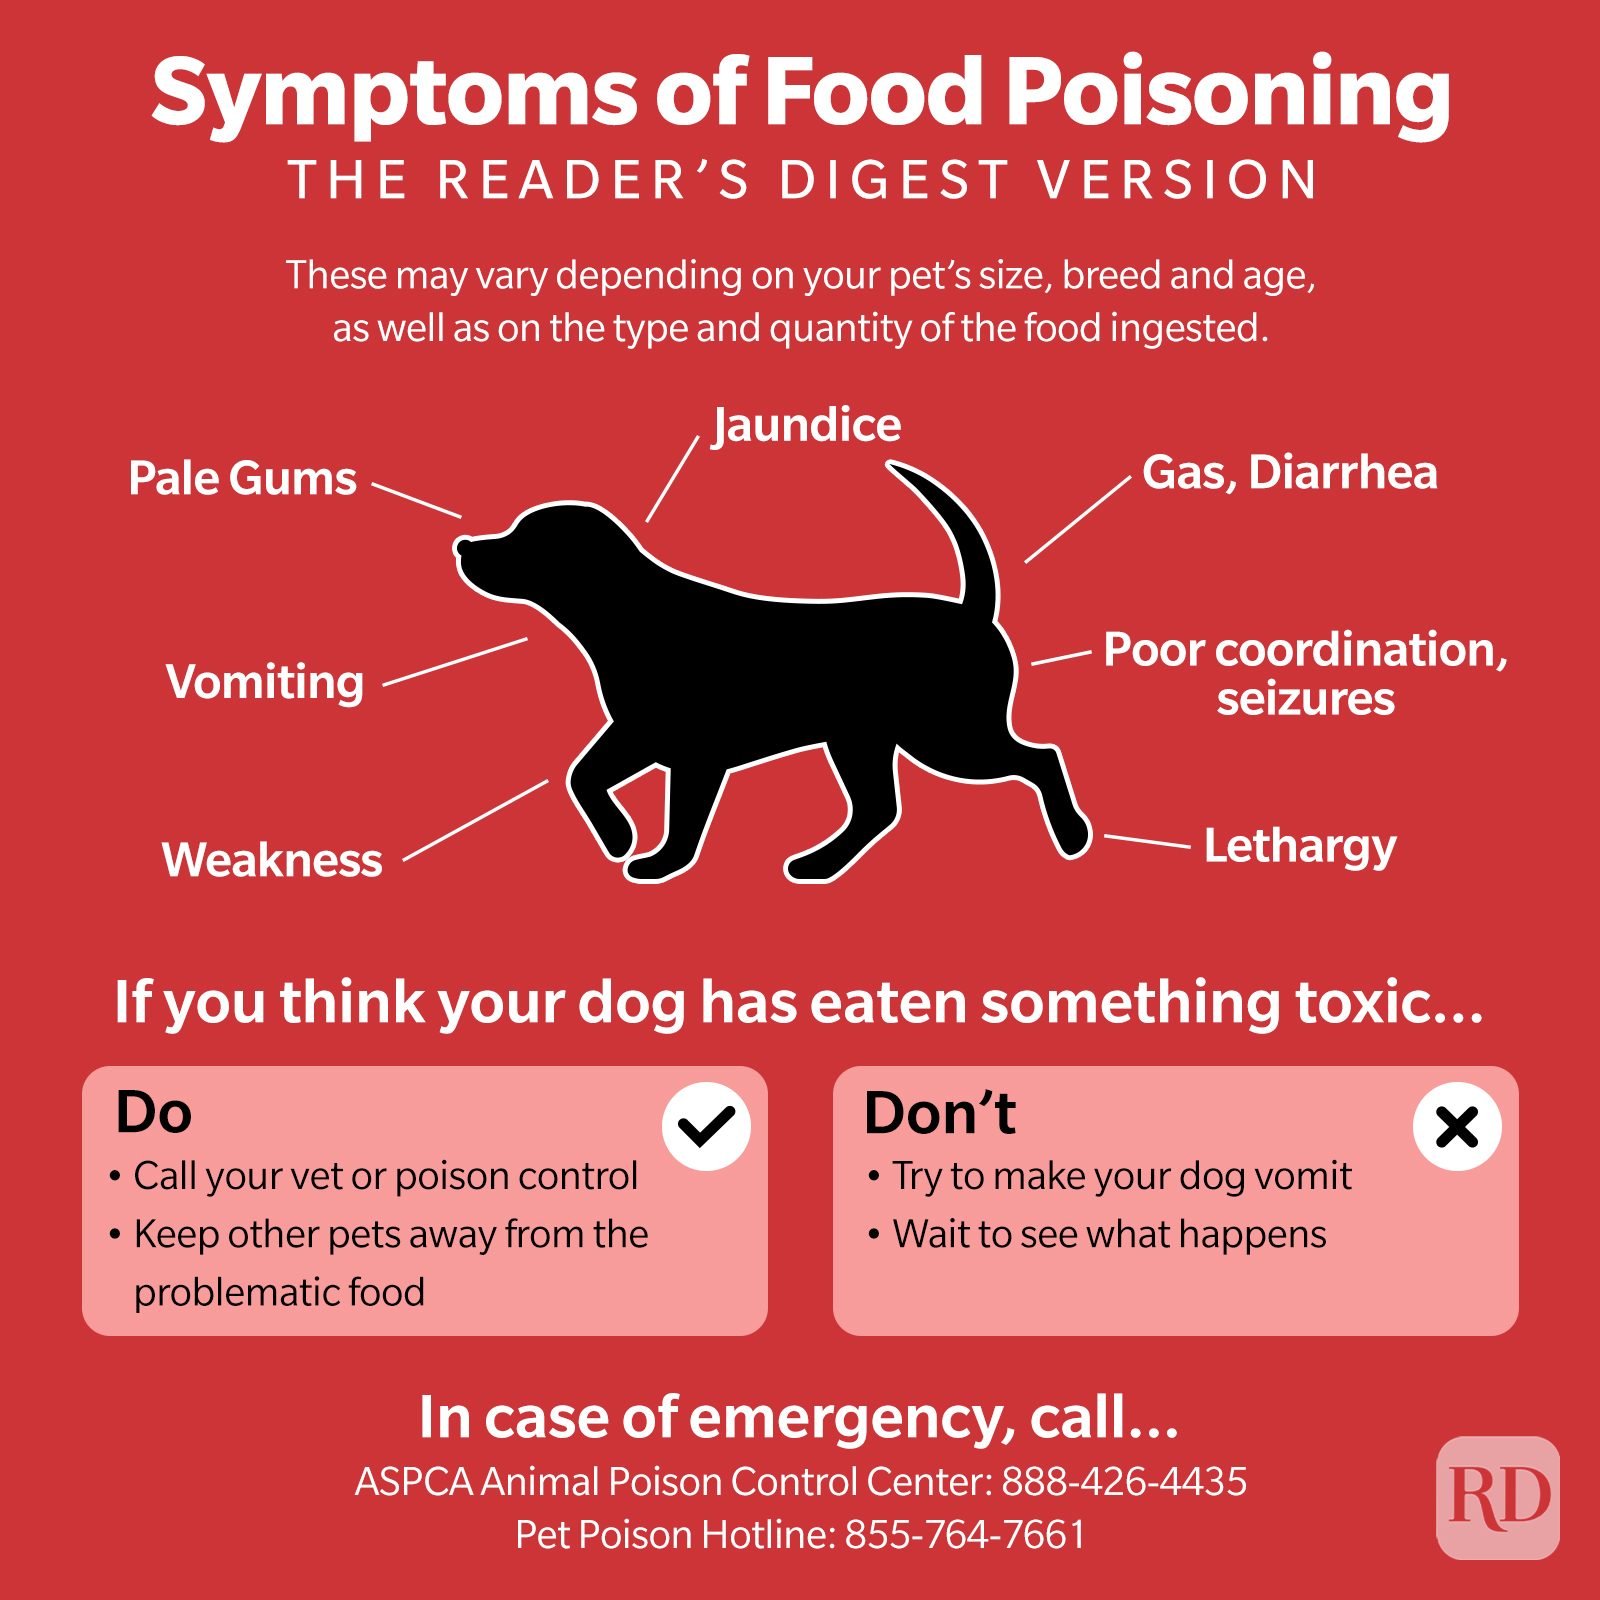 https://www.rd.com/wp-content/uploads/2018/09/Symptoms-of-Food-Poisoning_Infographic.jpg?fit=700%2C700